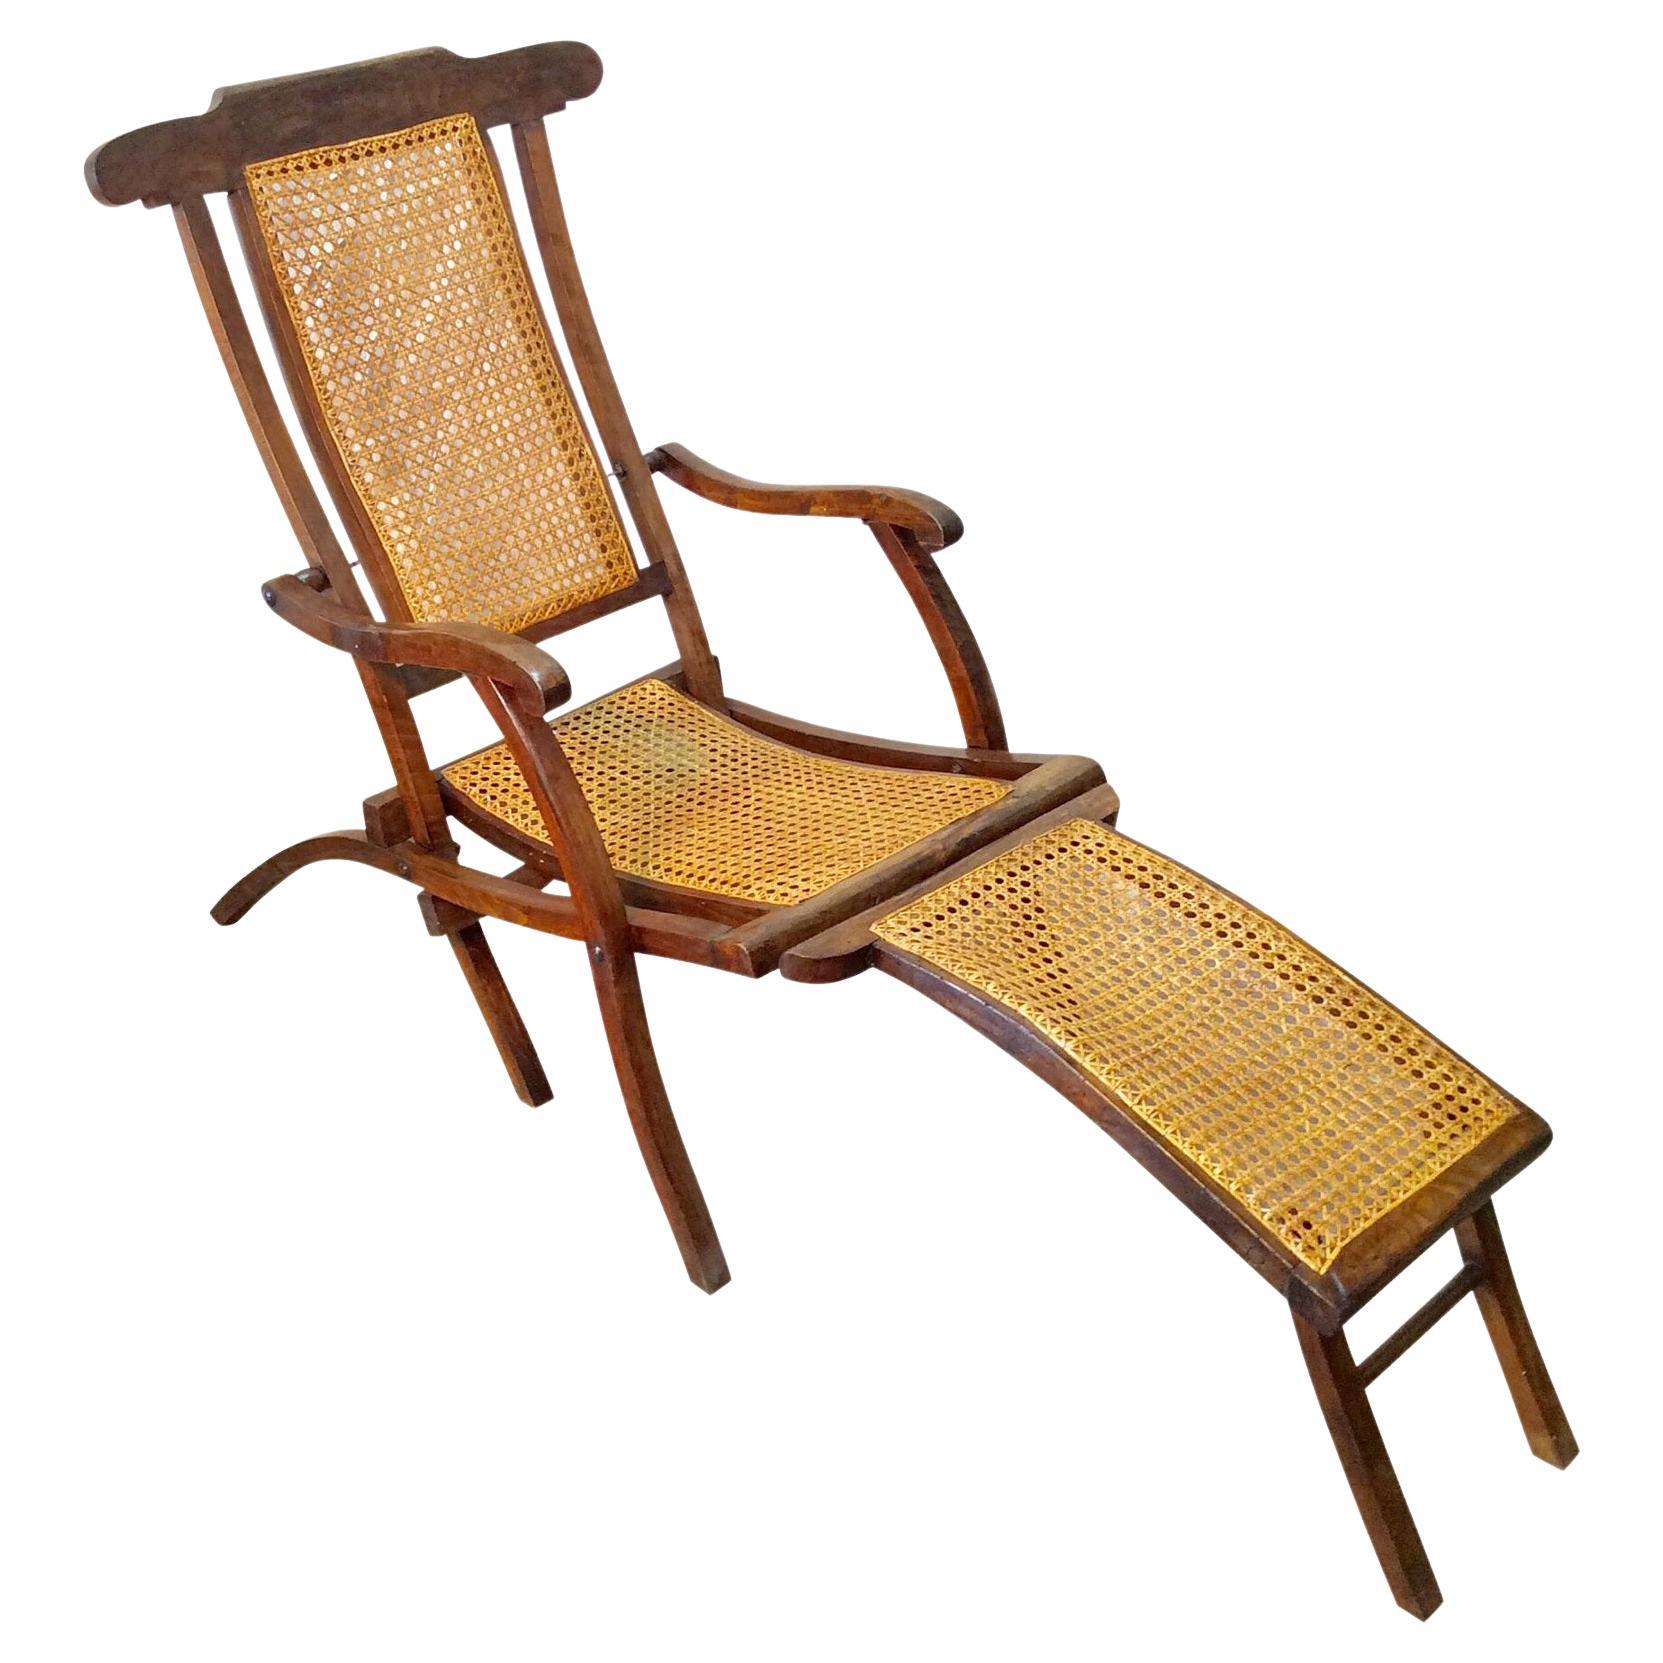 Early 20th Century French Walnut and Cane Steamer Deck Chair